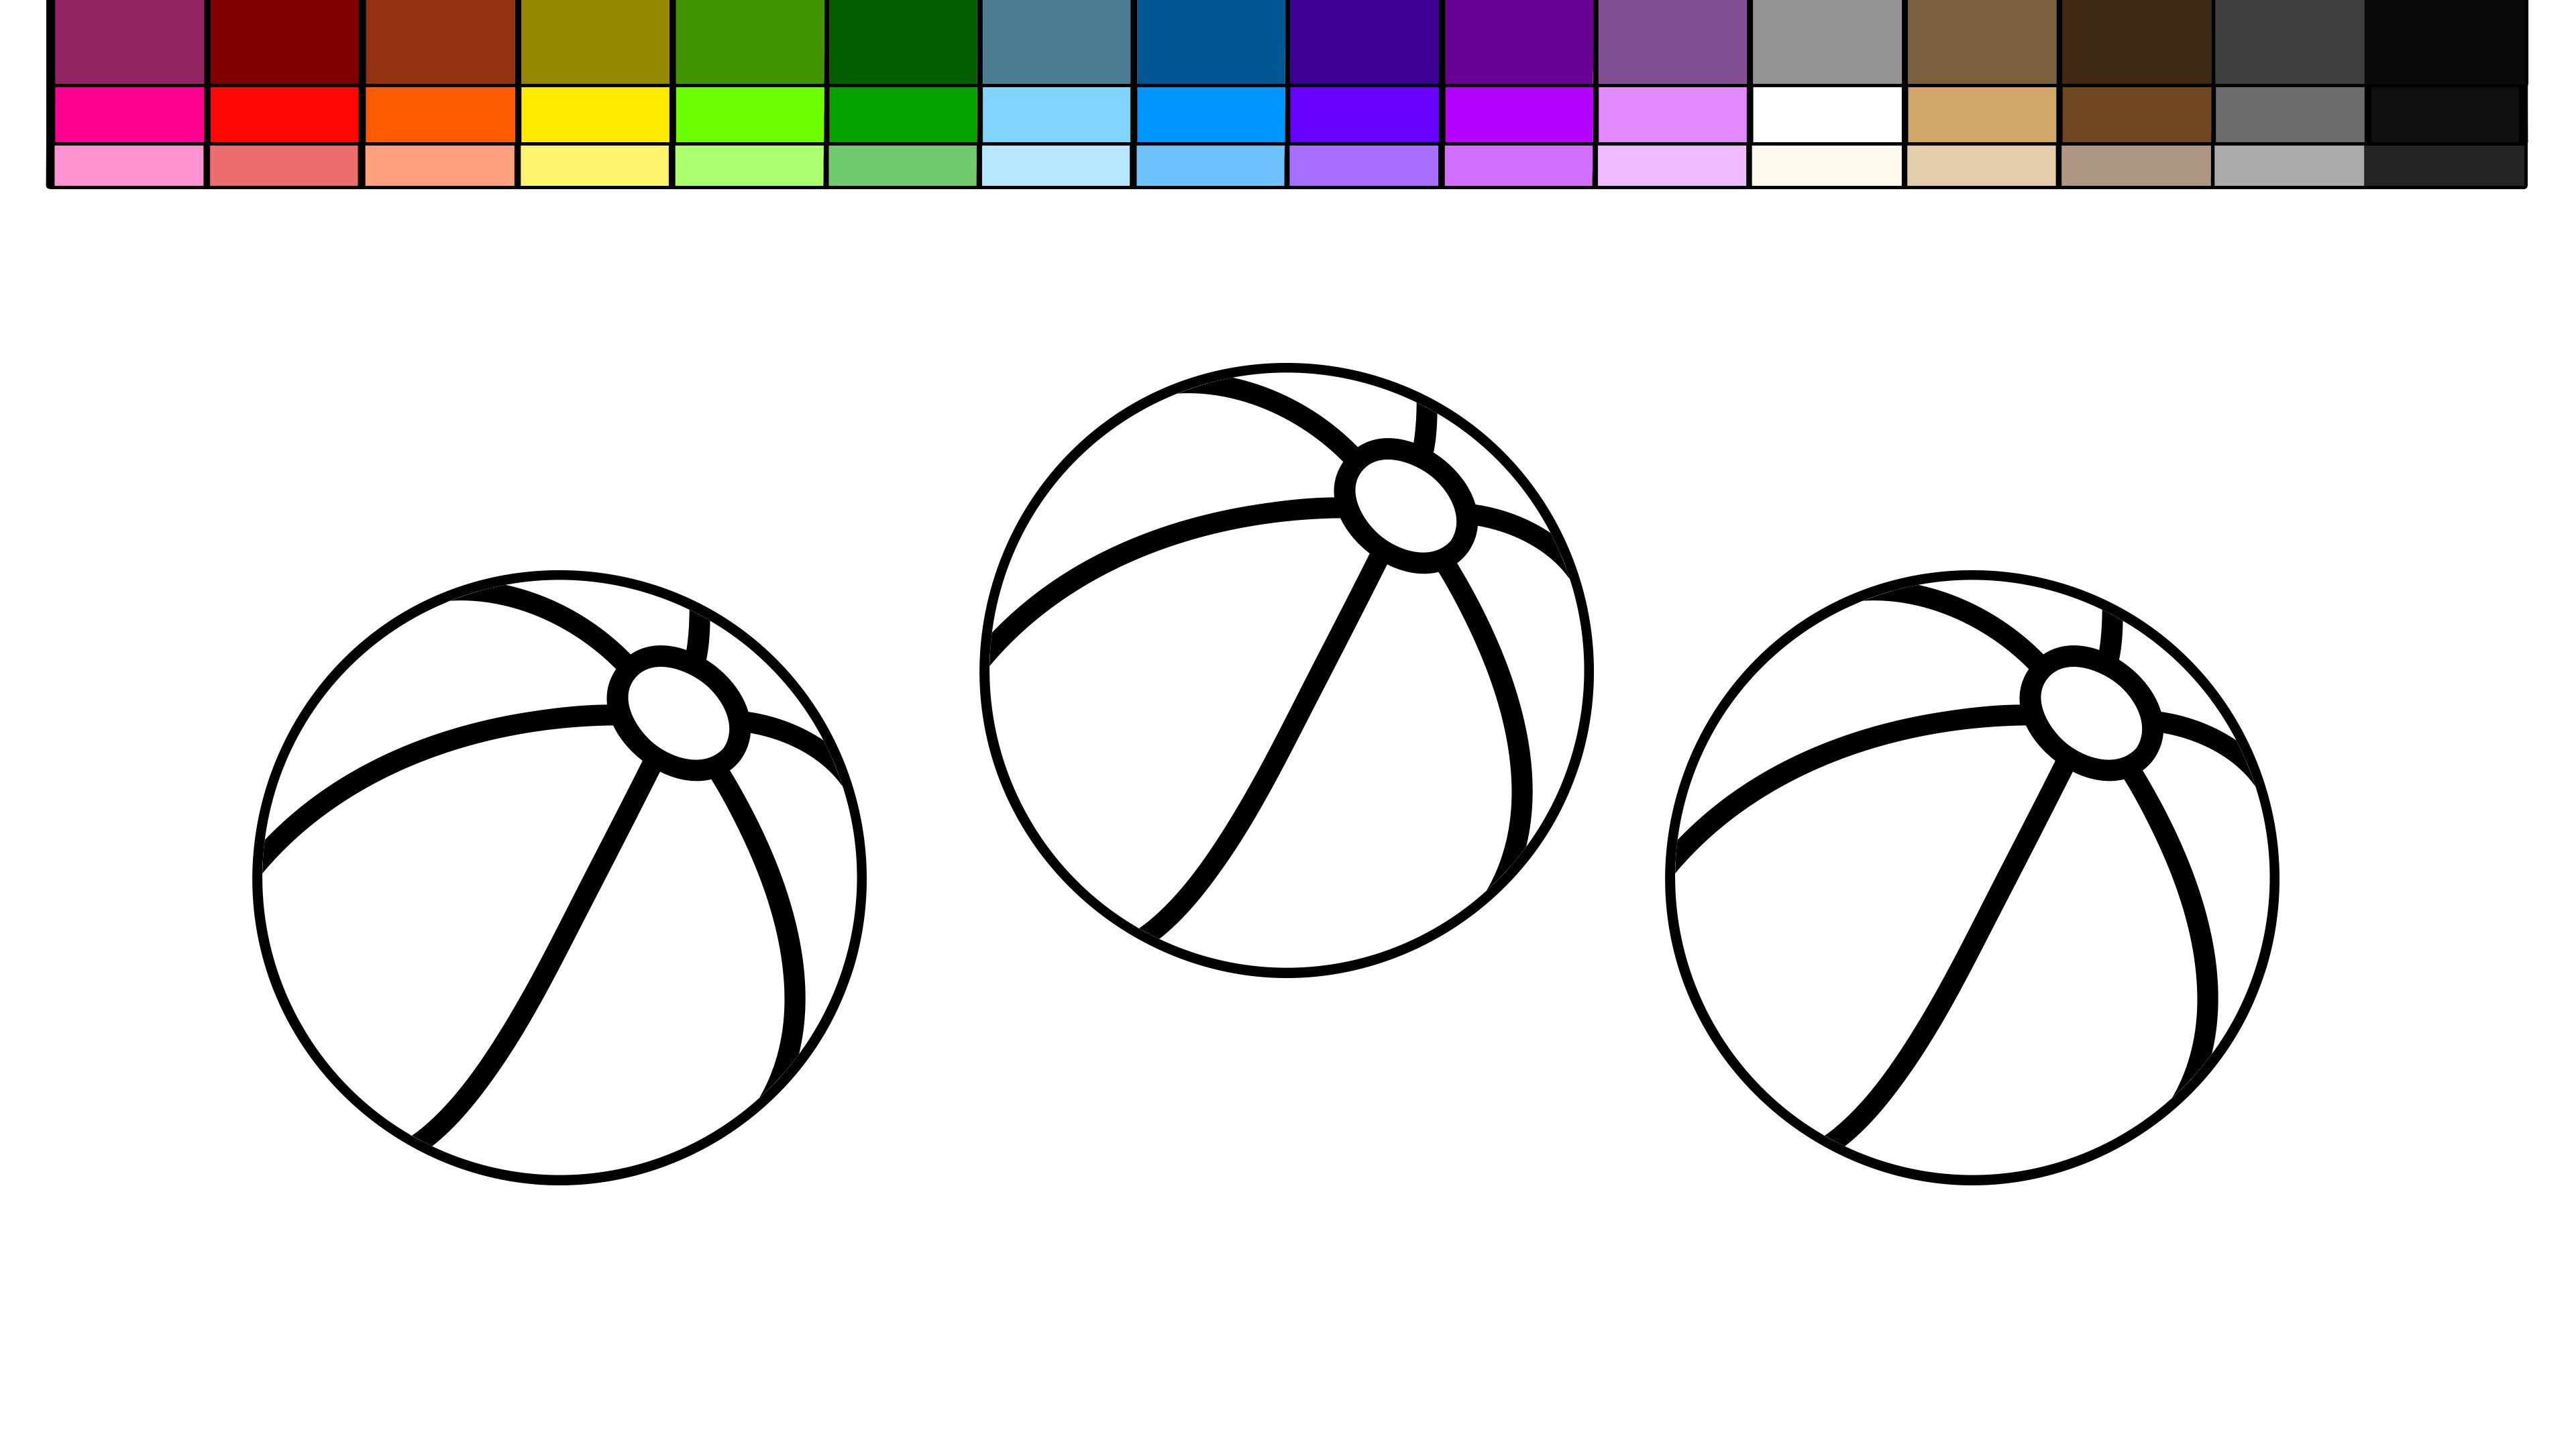 Learn Colors for Kids and Color Beach Ball Coloring Page - YouTube